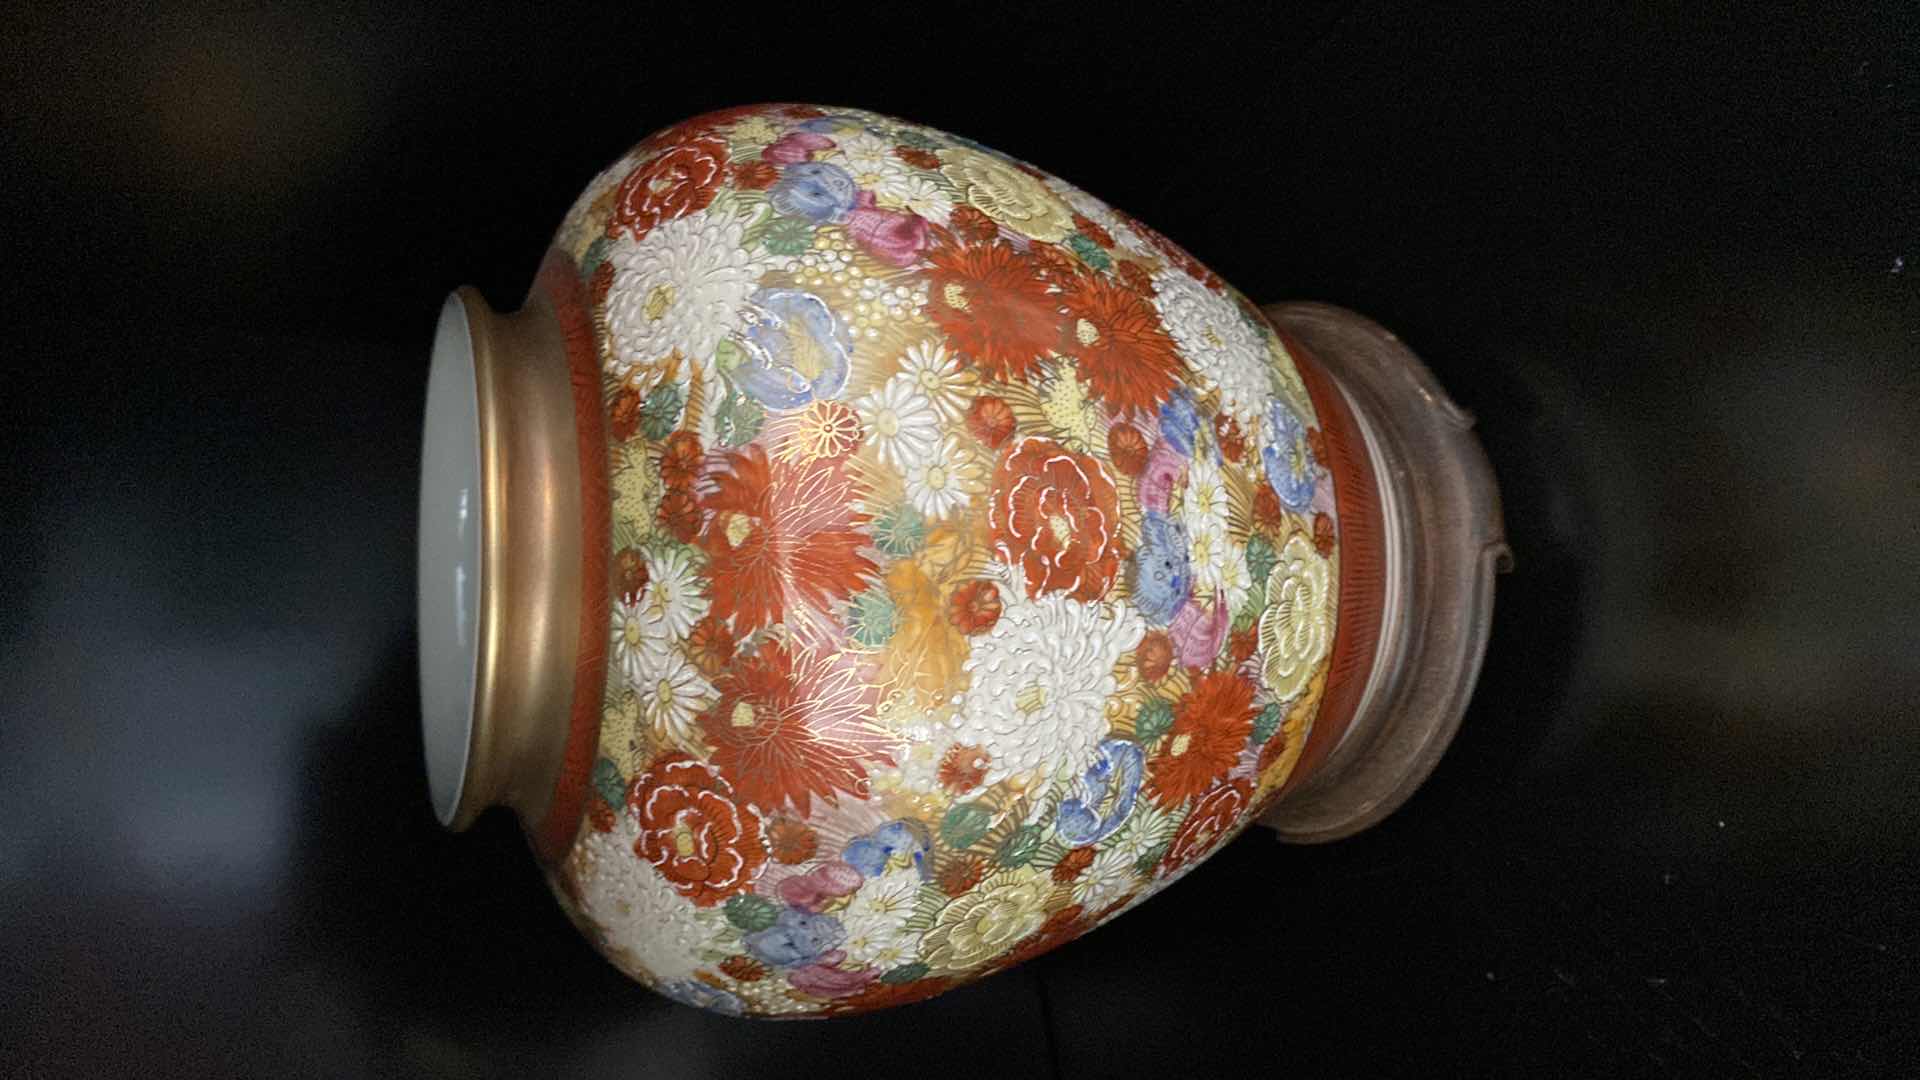 Photo 2 of FINE JAPANESE PORCELAIN VASE 8“ x 9 1/2“ INCLUDES STAND